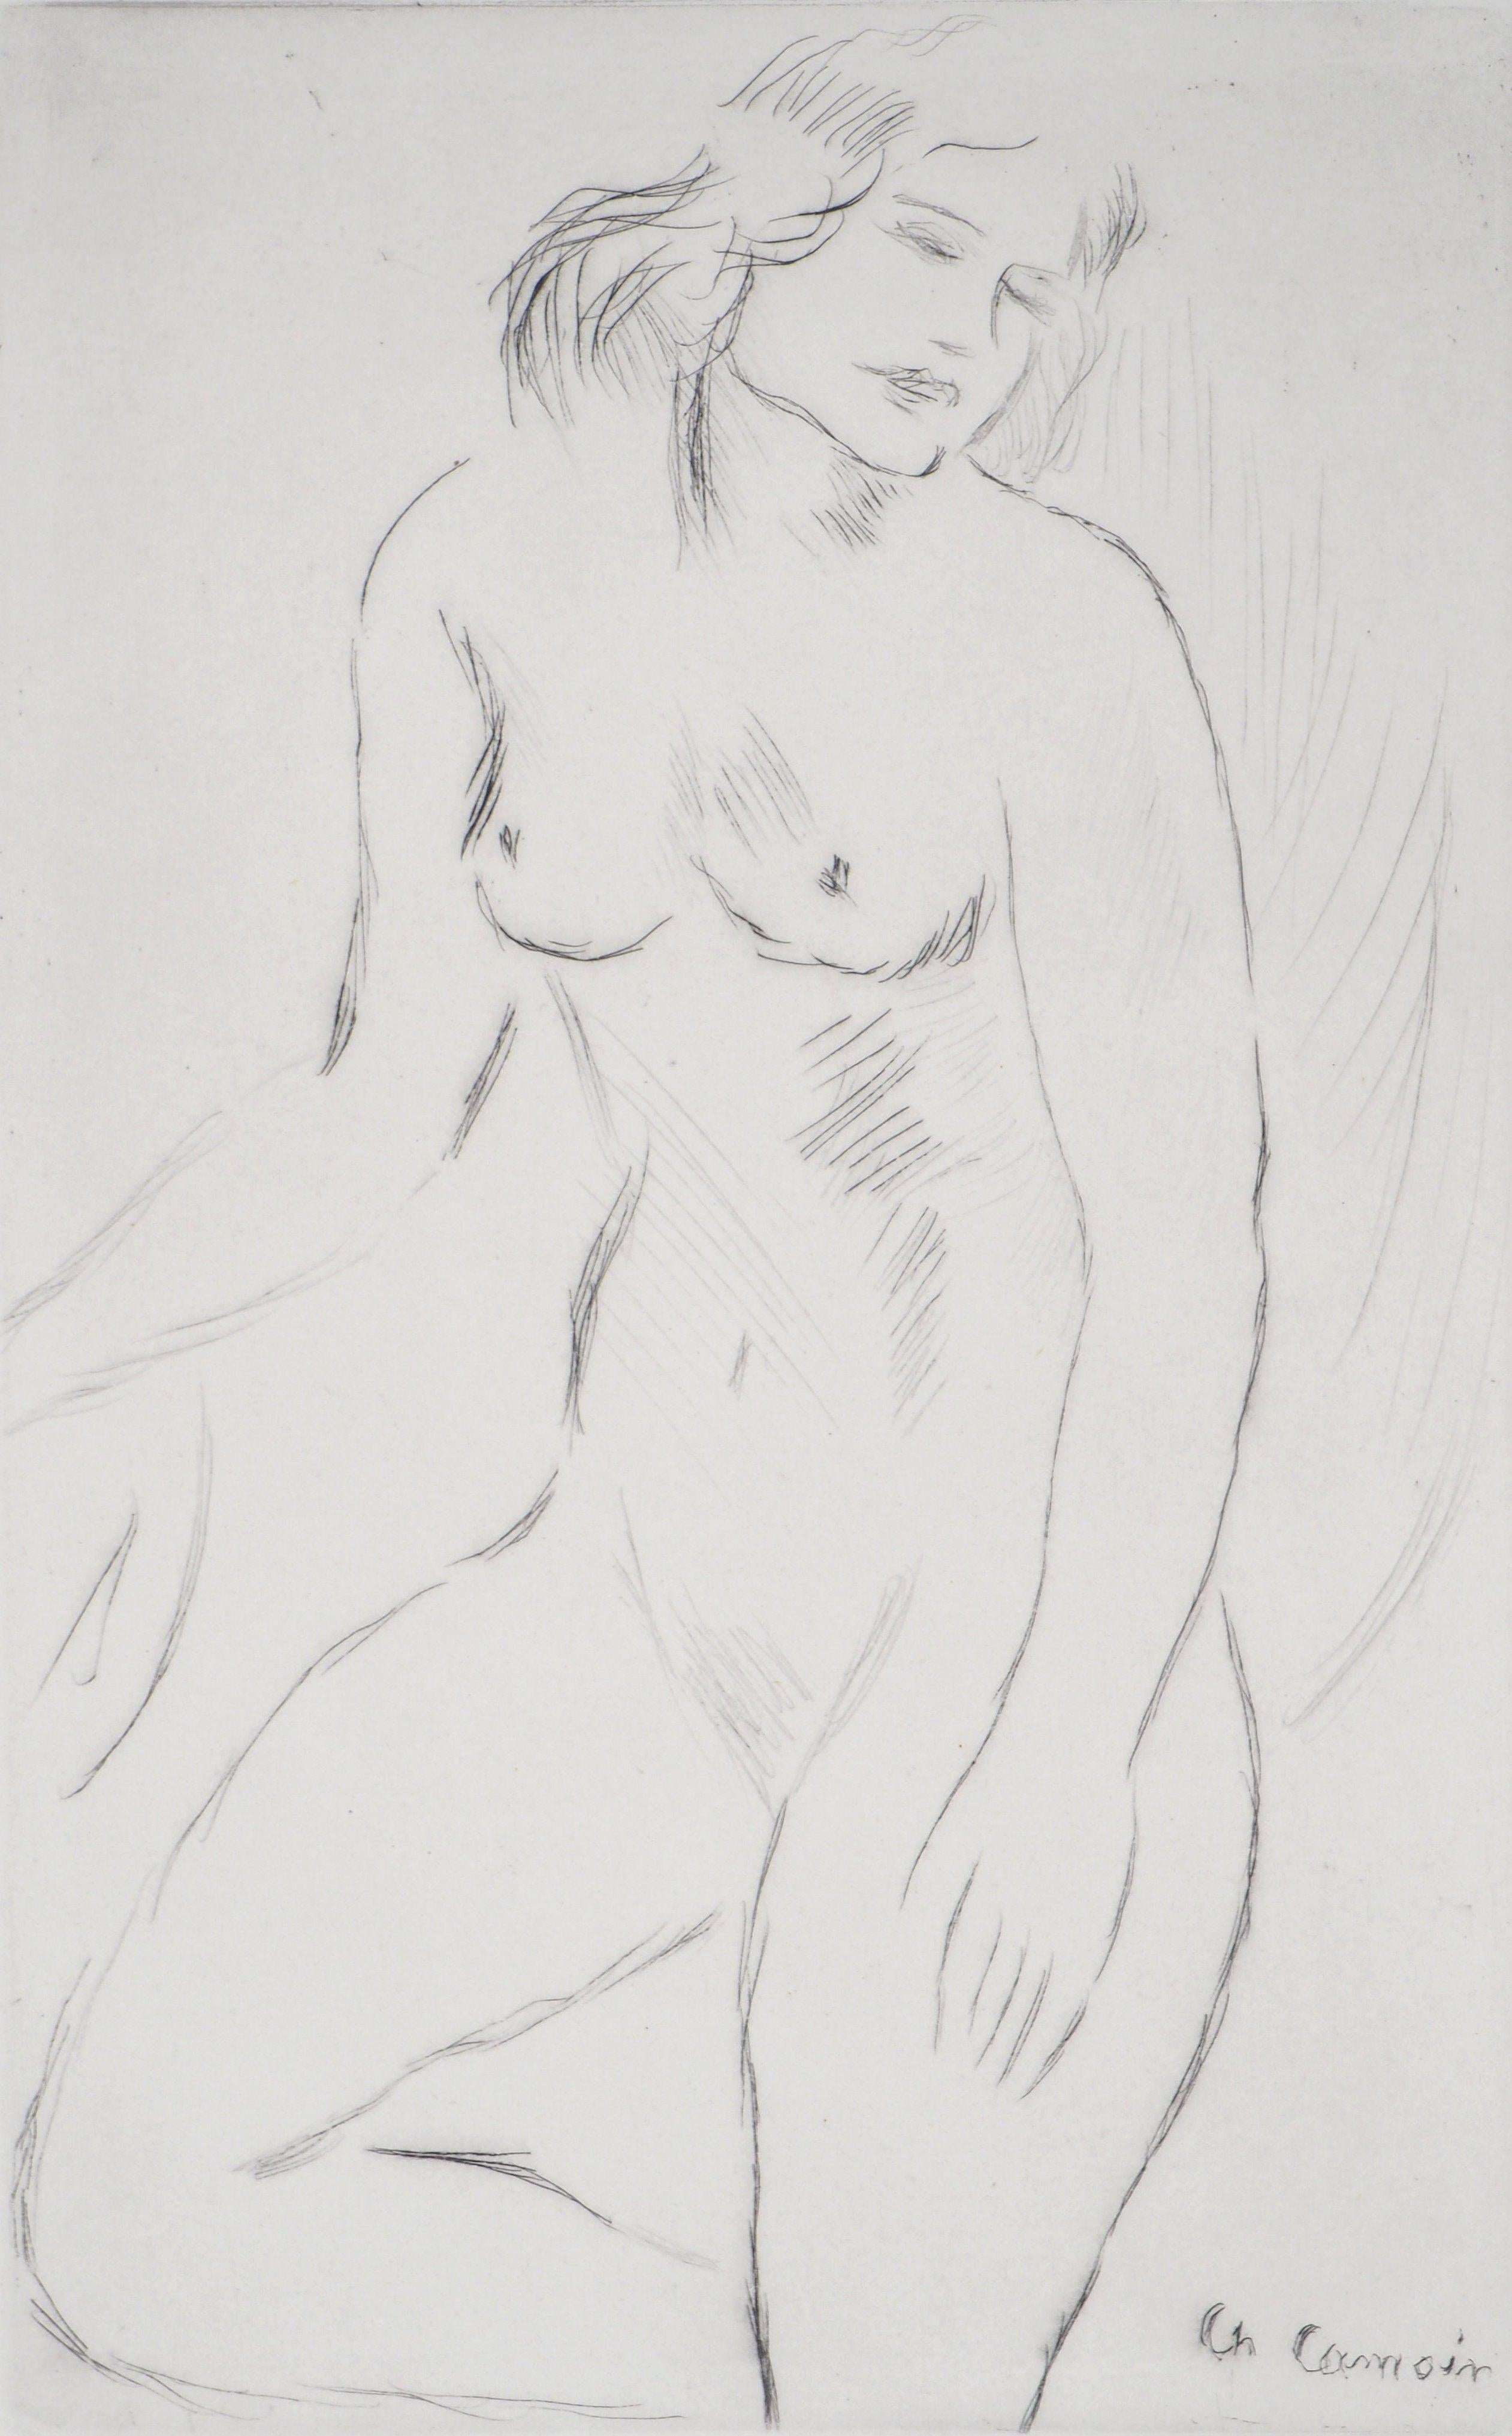 Standing Nude - Original etching - Modern Print by Charles Camoin